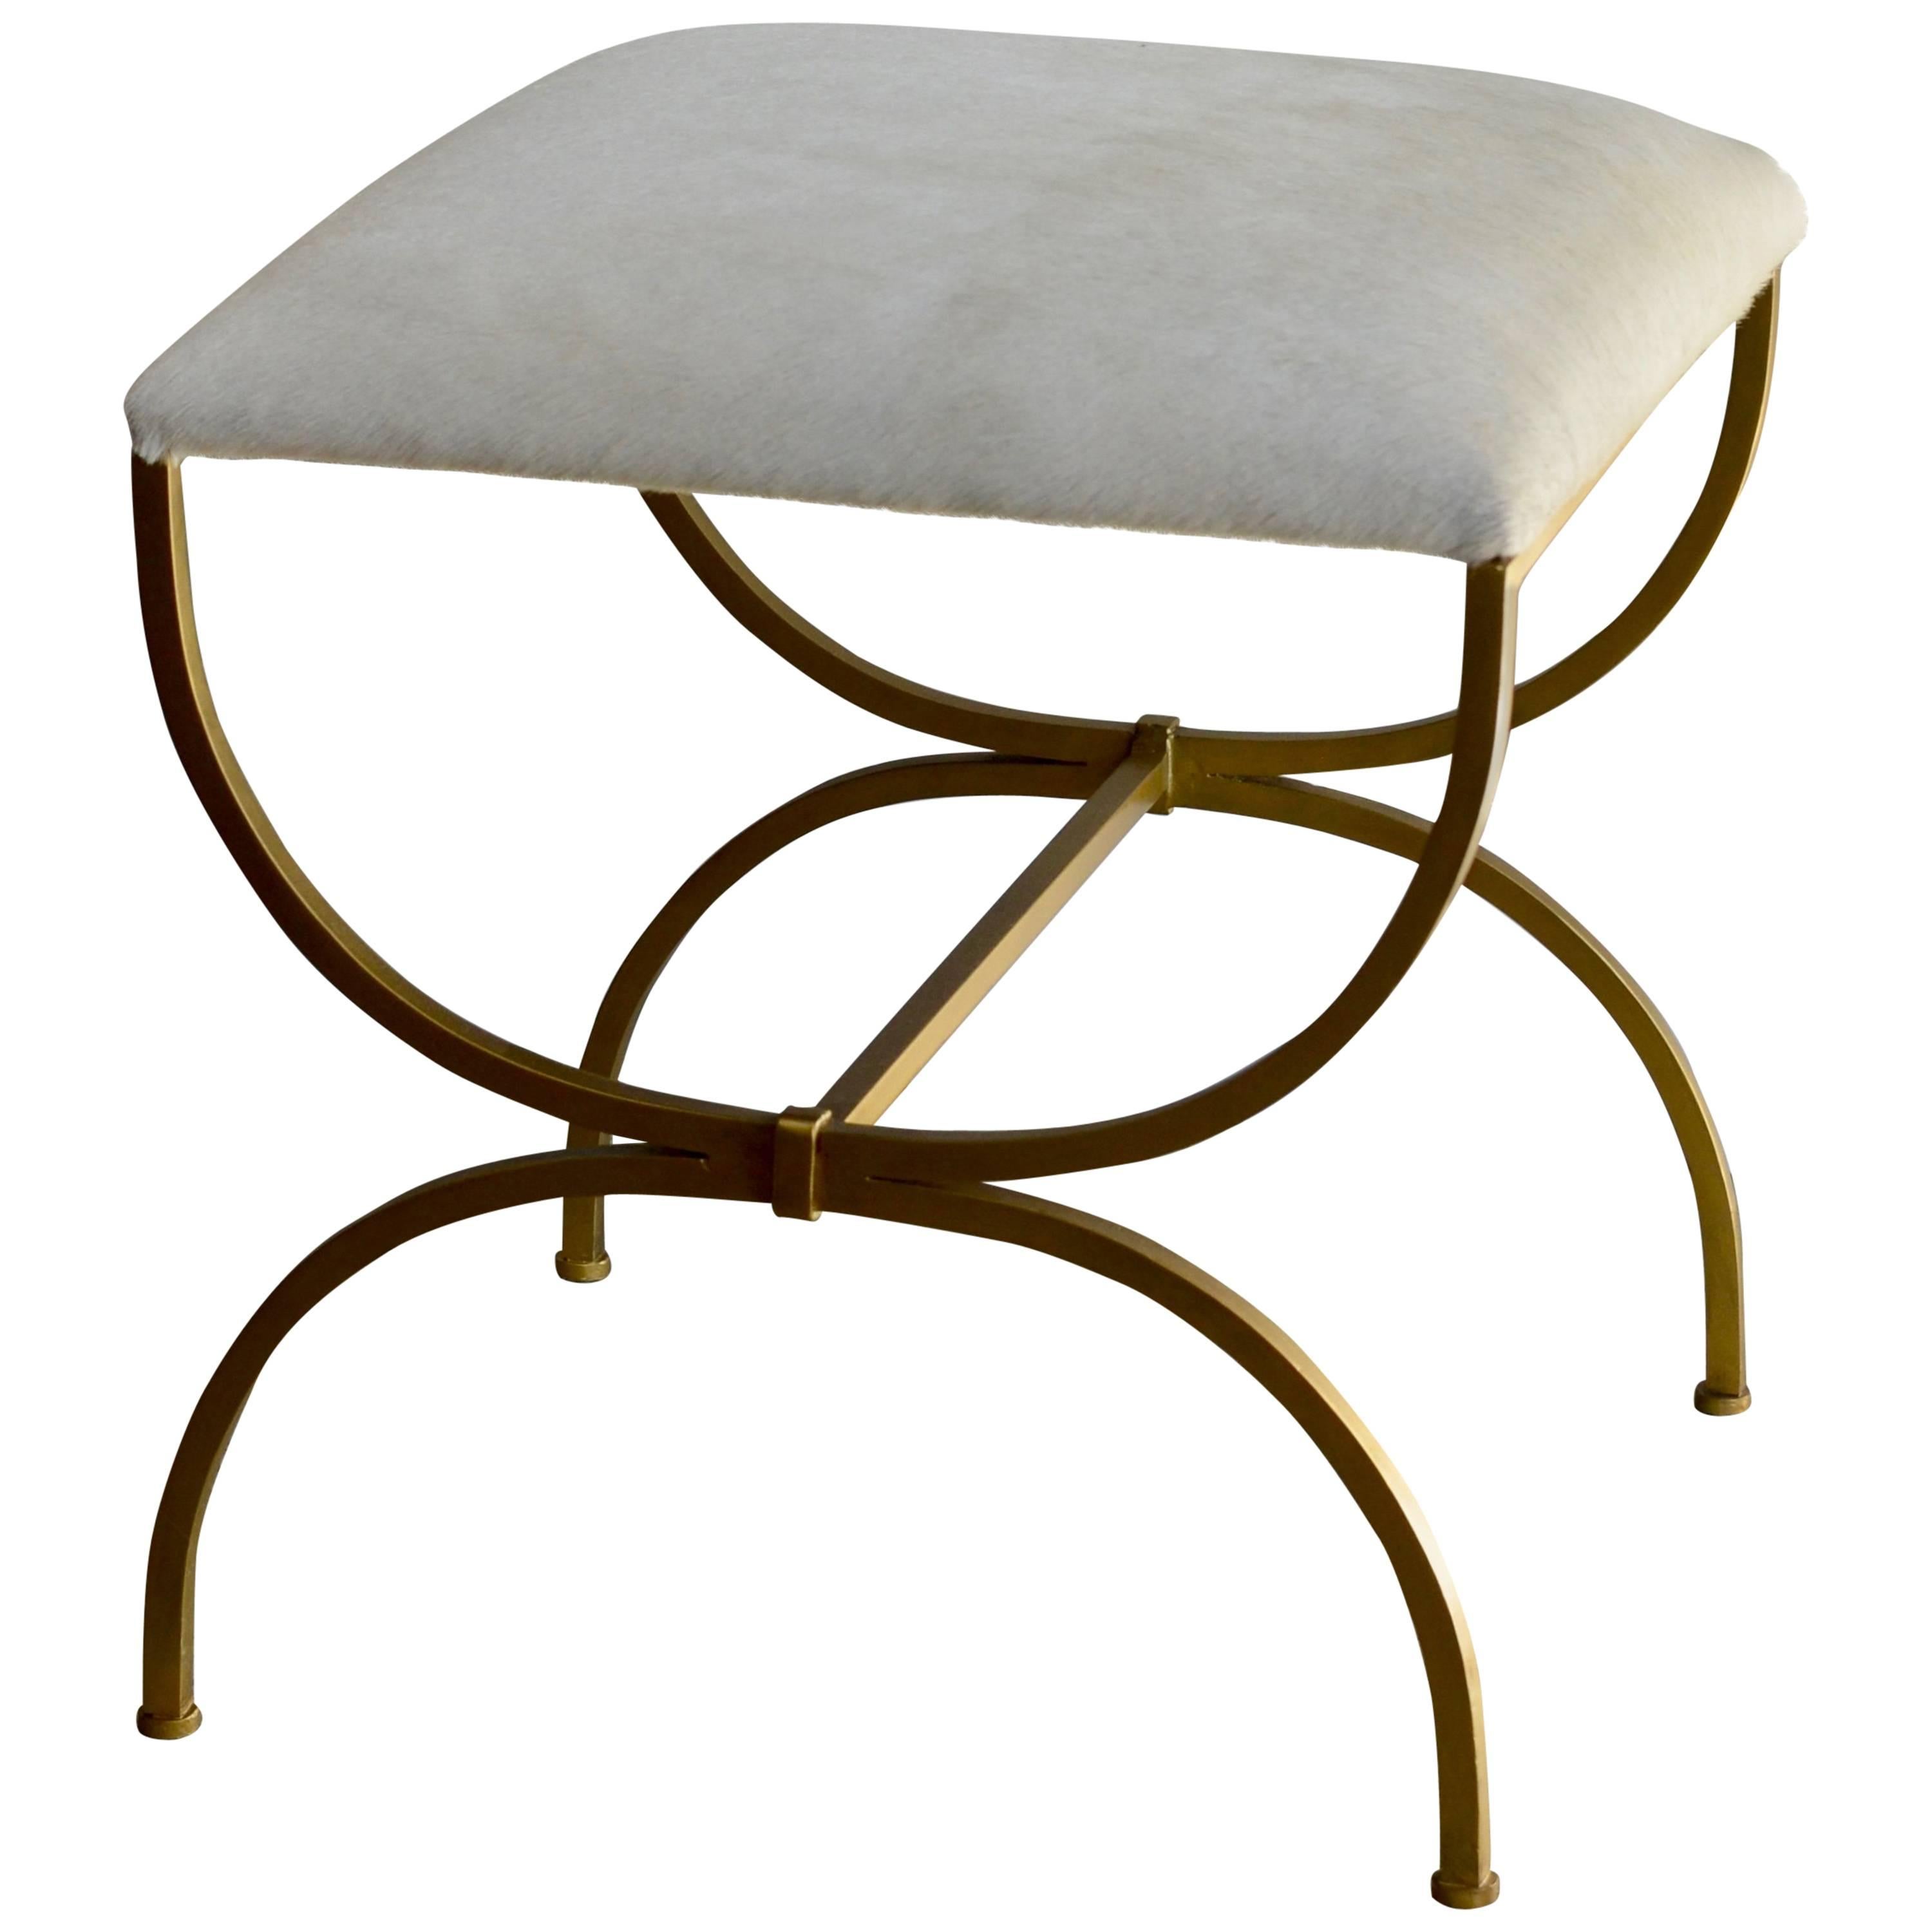 The 'Strapontin' Gilt Metal and White Hide Stool by Design Frères For Sale